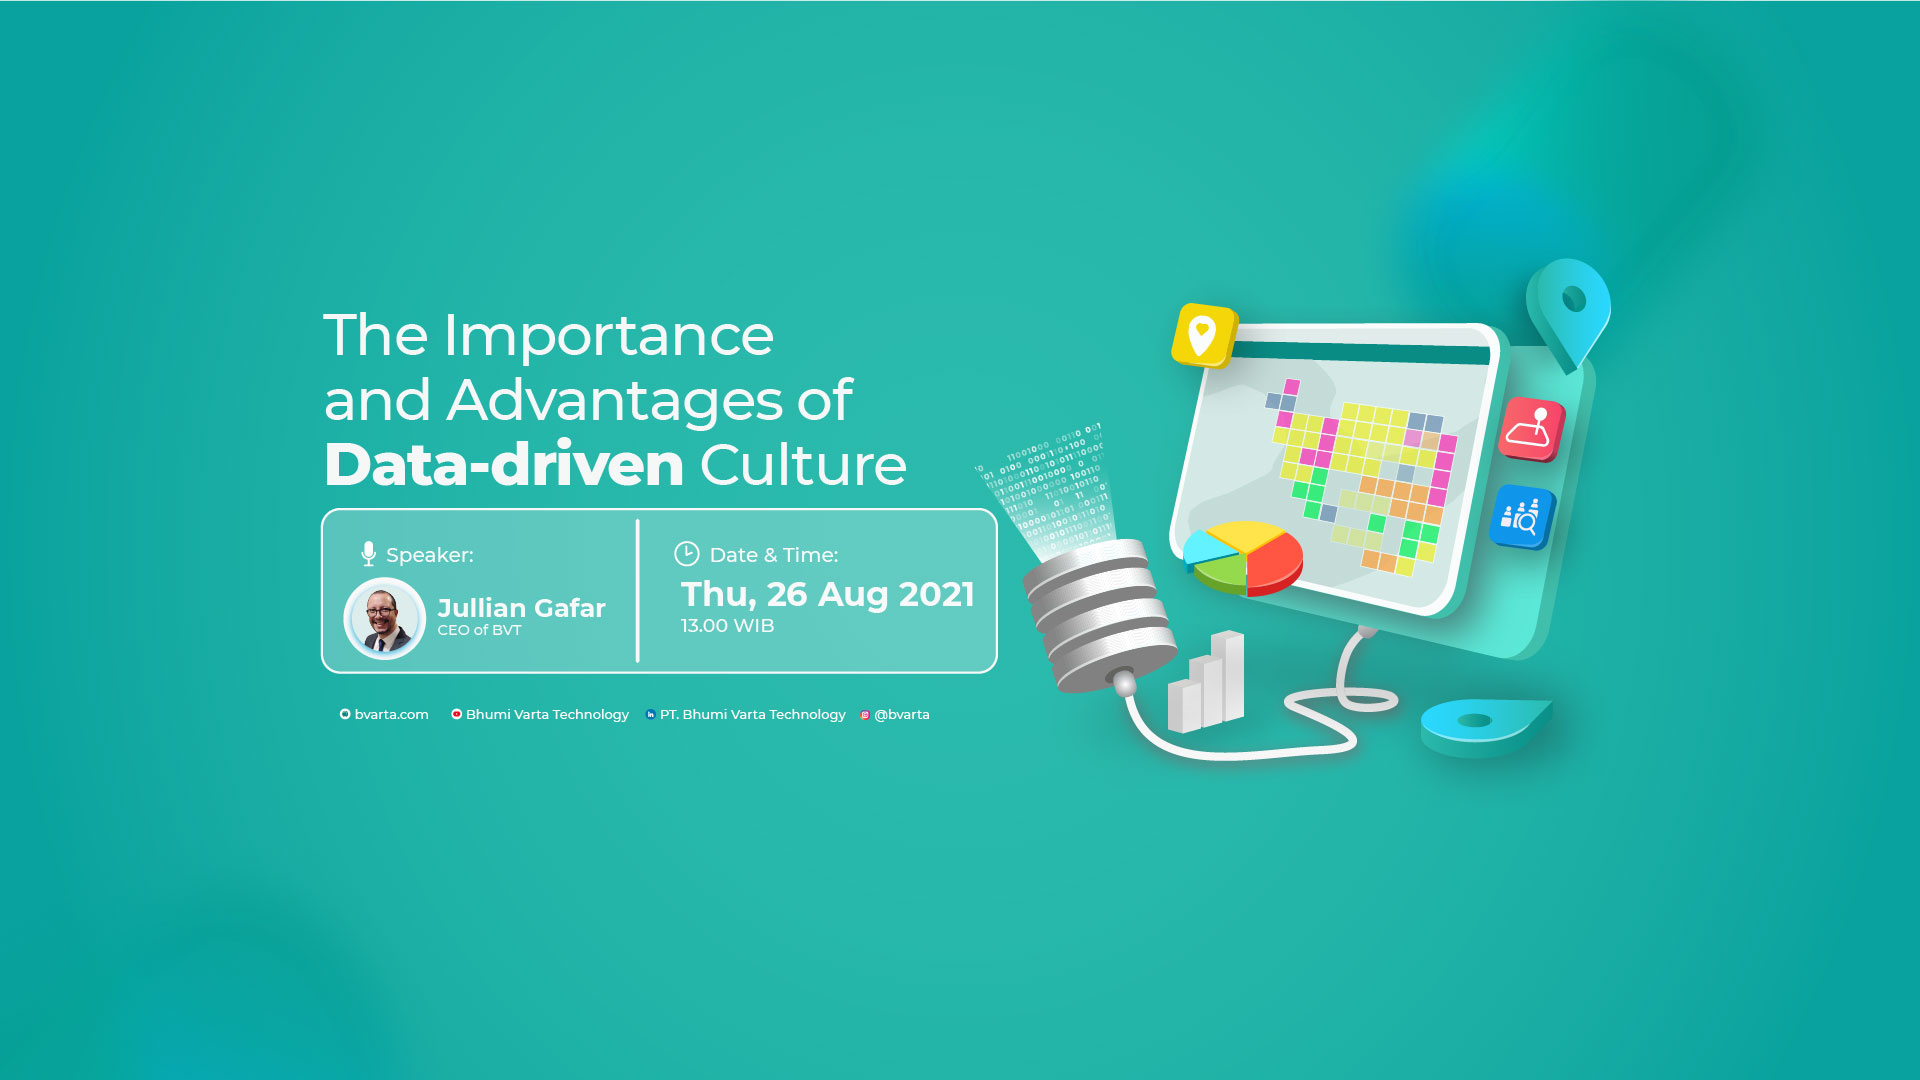 The Importance and Advantages of Data-driven Culture